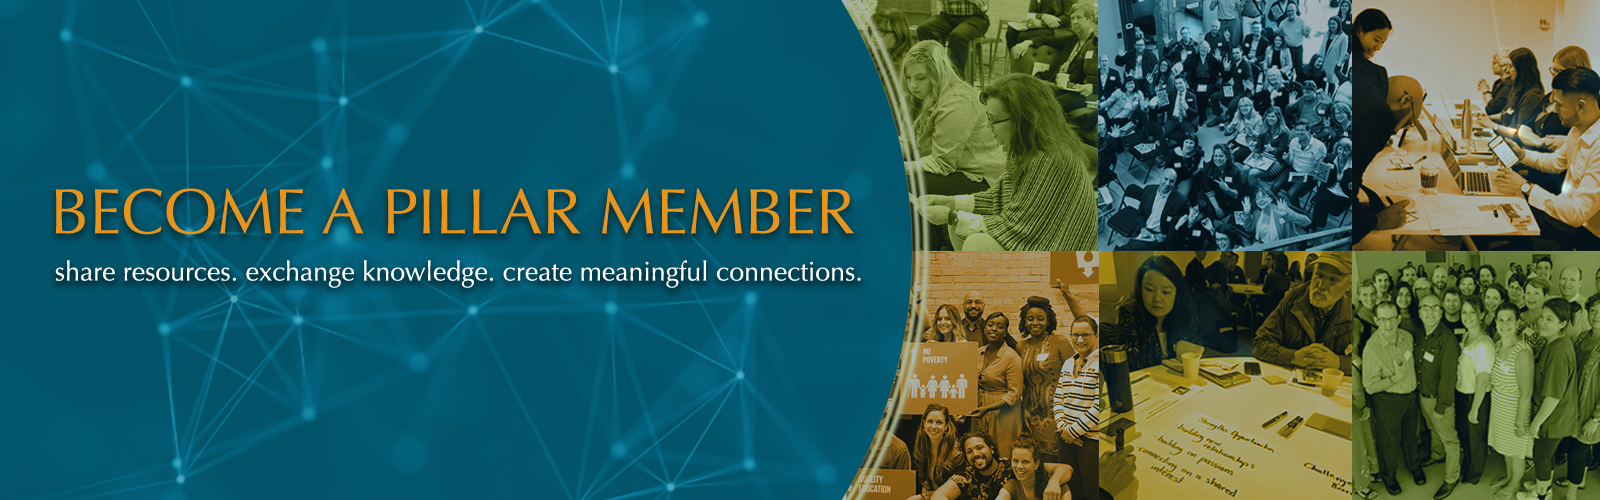 Become a Pillar Member: Share resources, exchange knowledge, and create meaningful connections